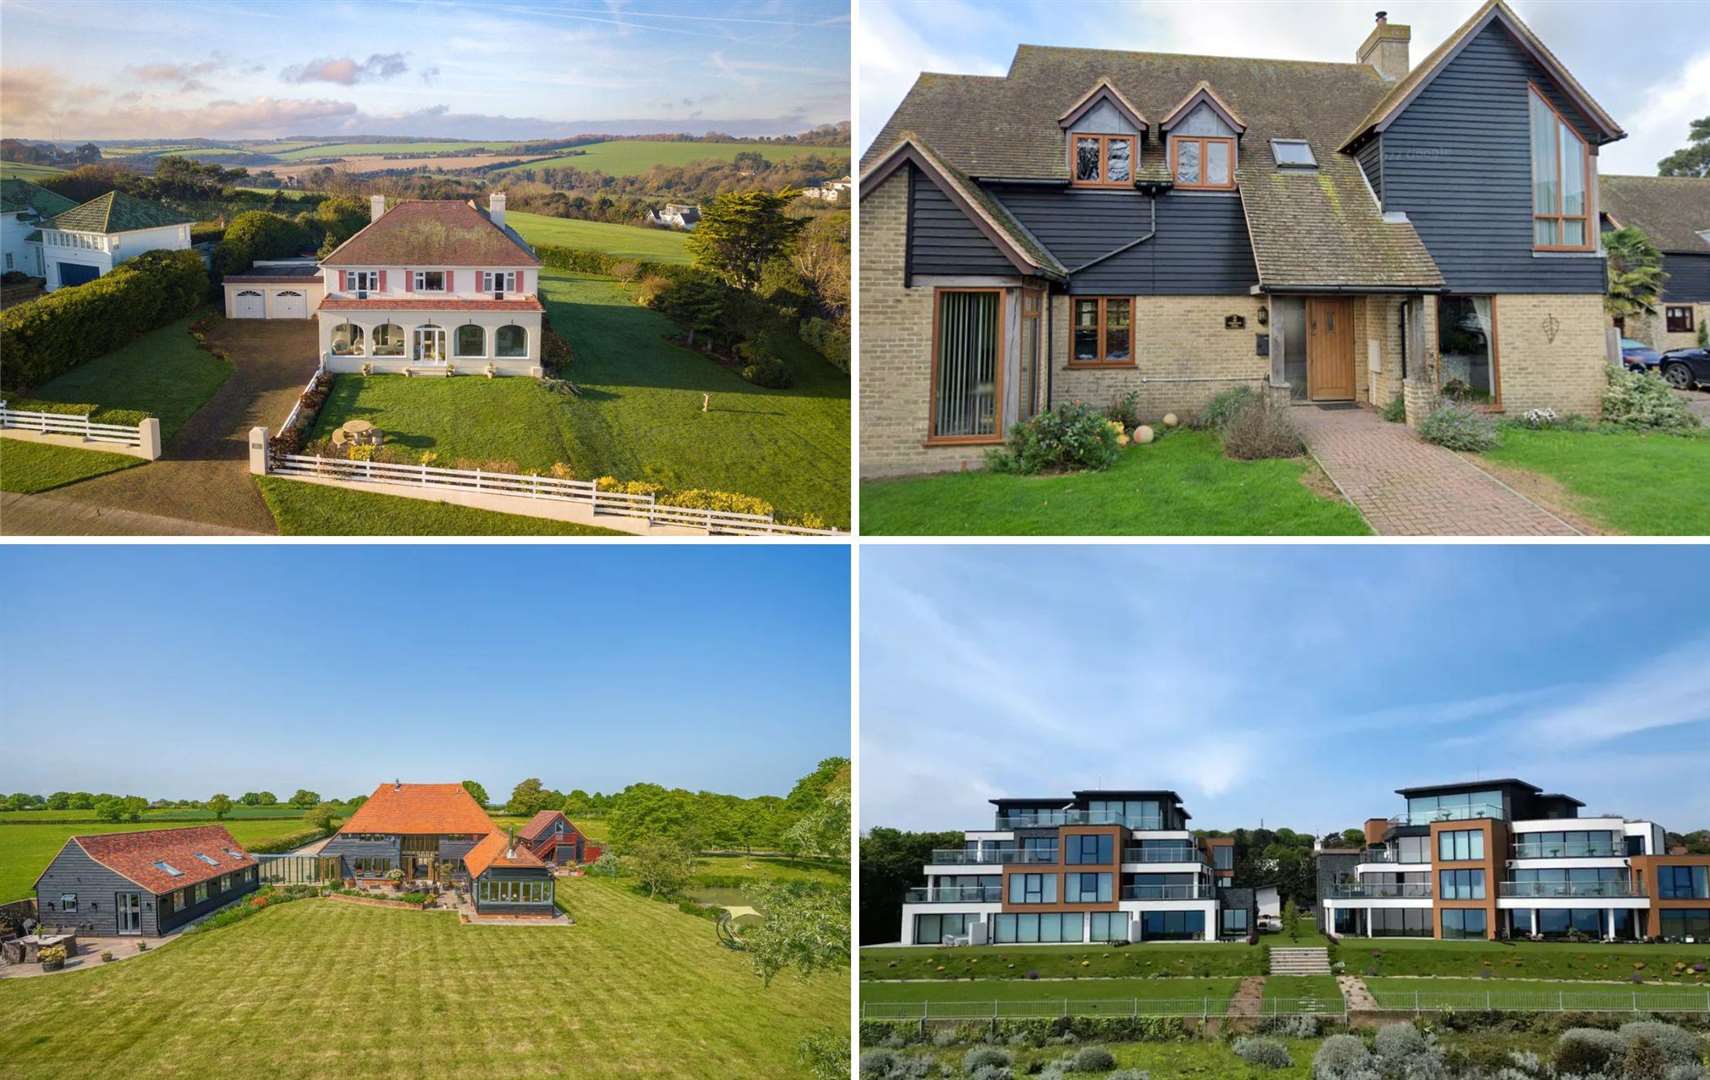 These houses can be found along some of Kent’s most expensive streets